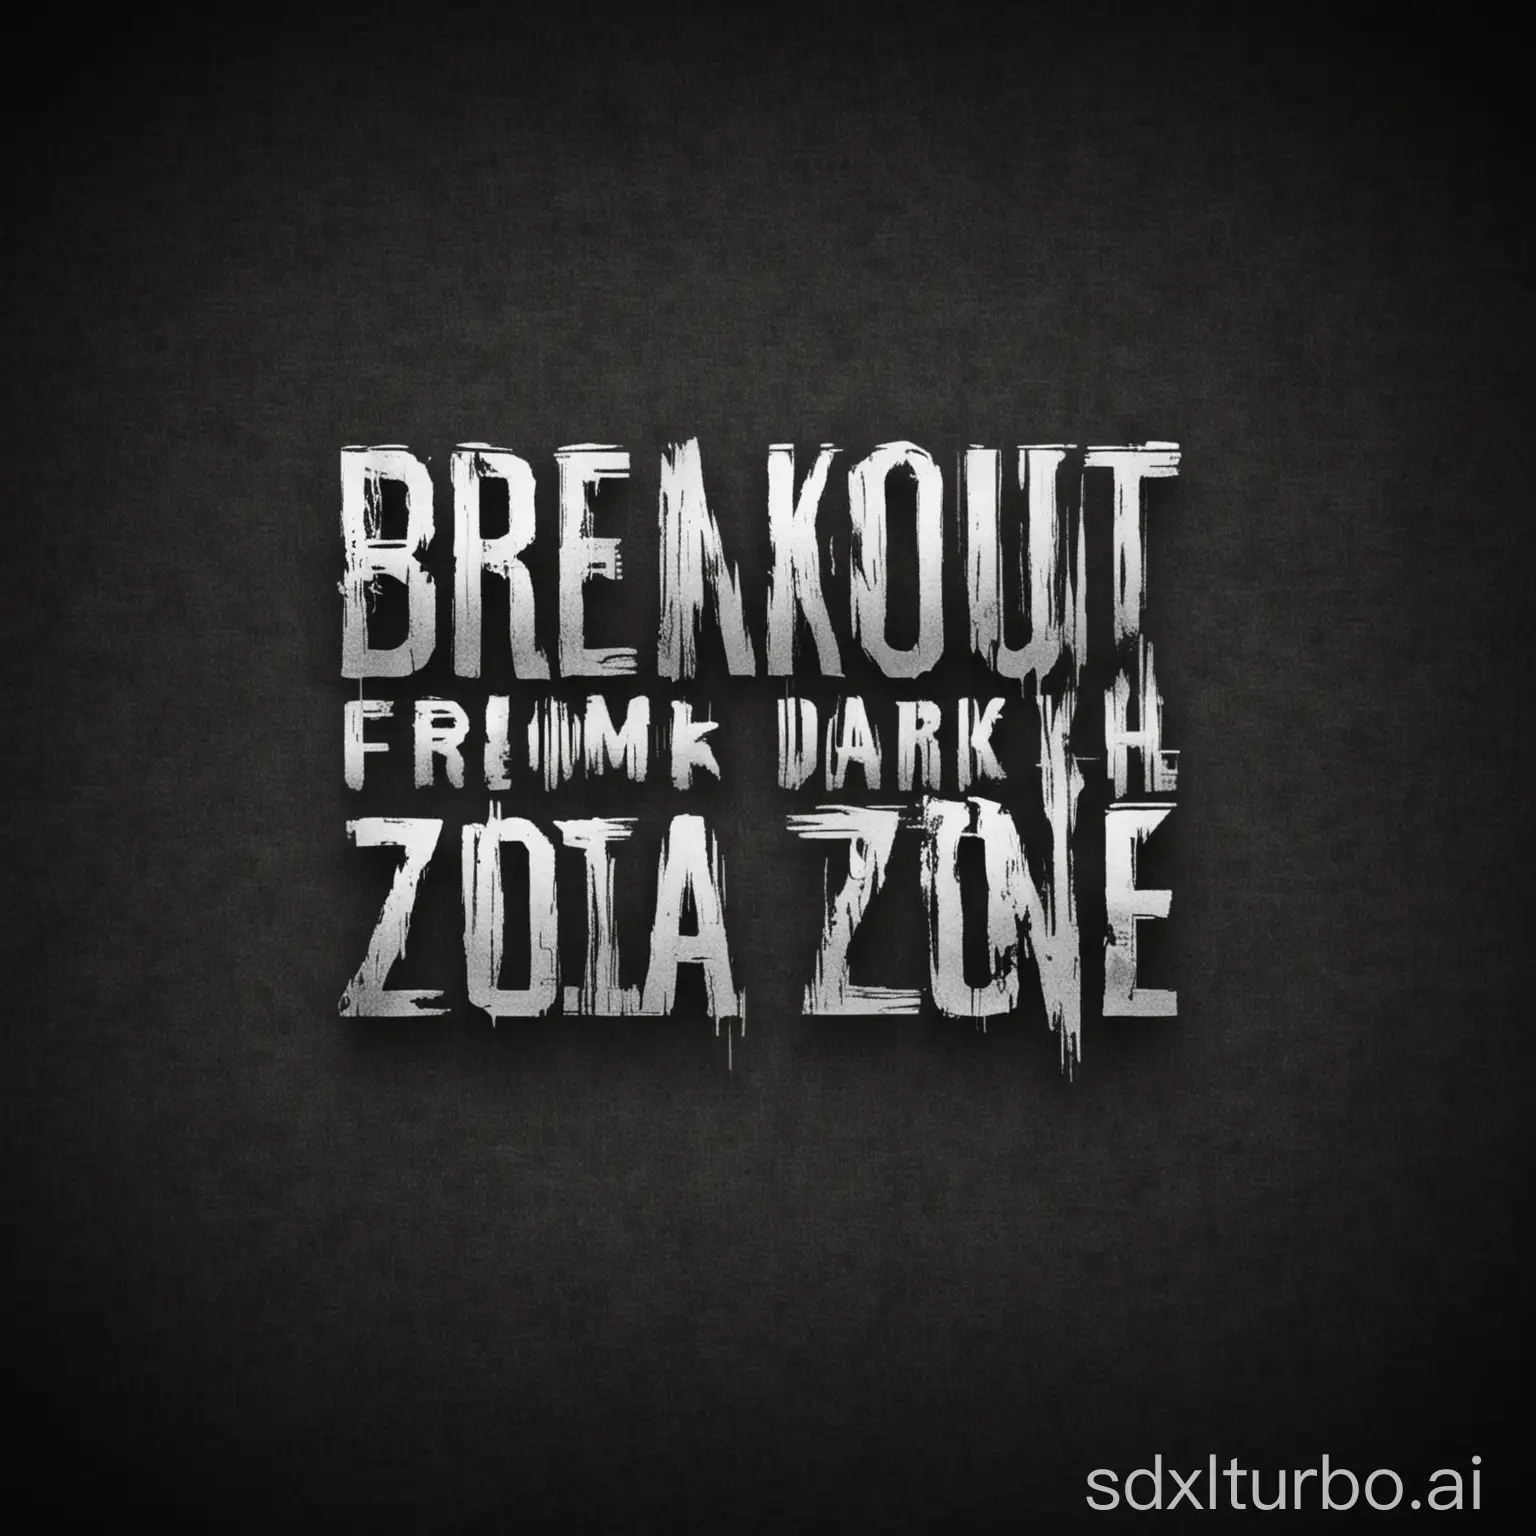 Breakout from the dark zone